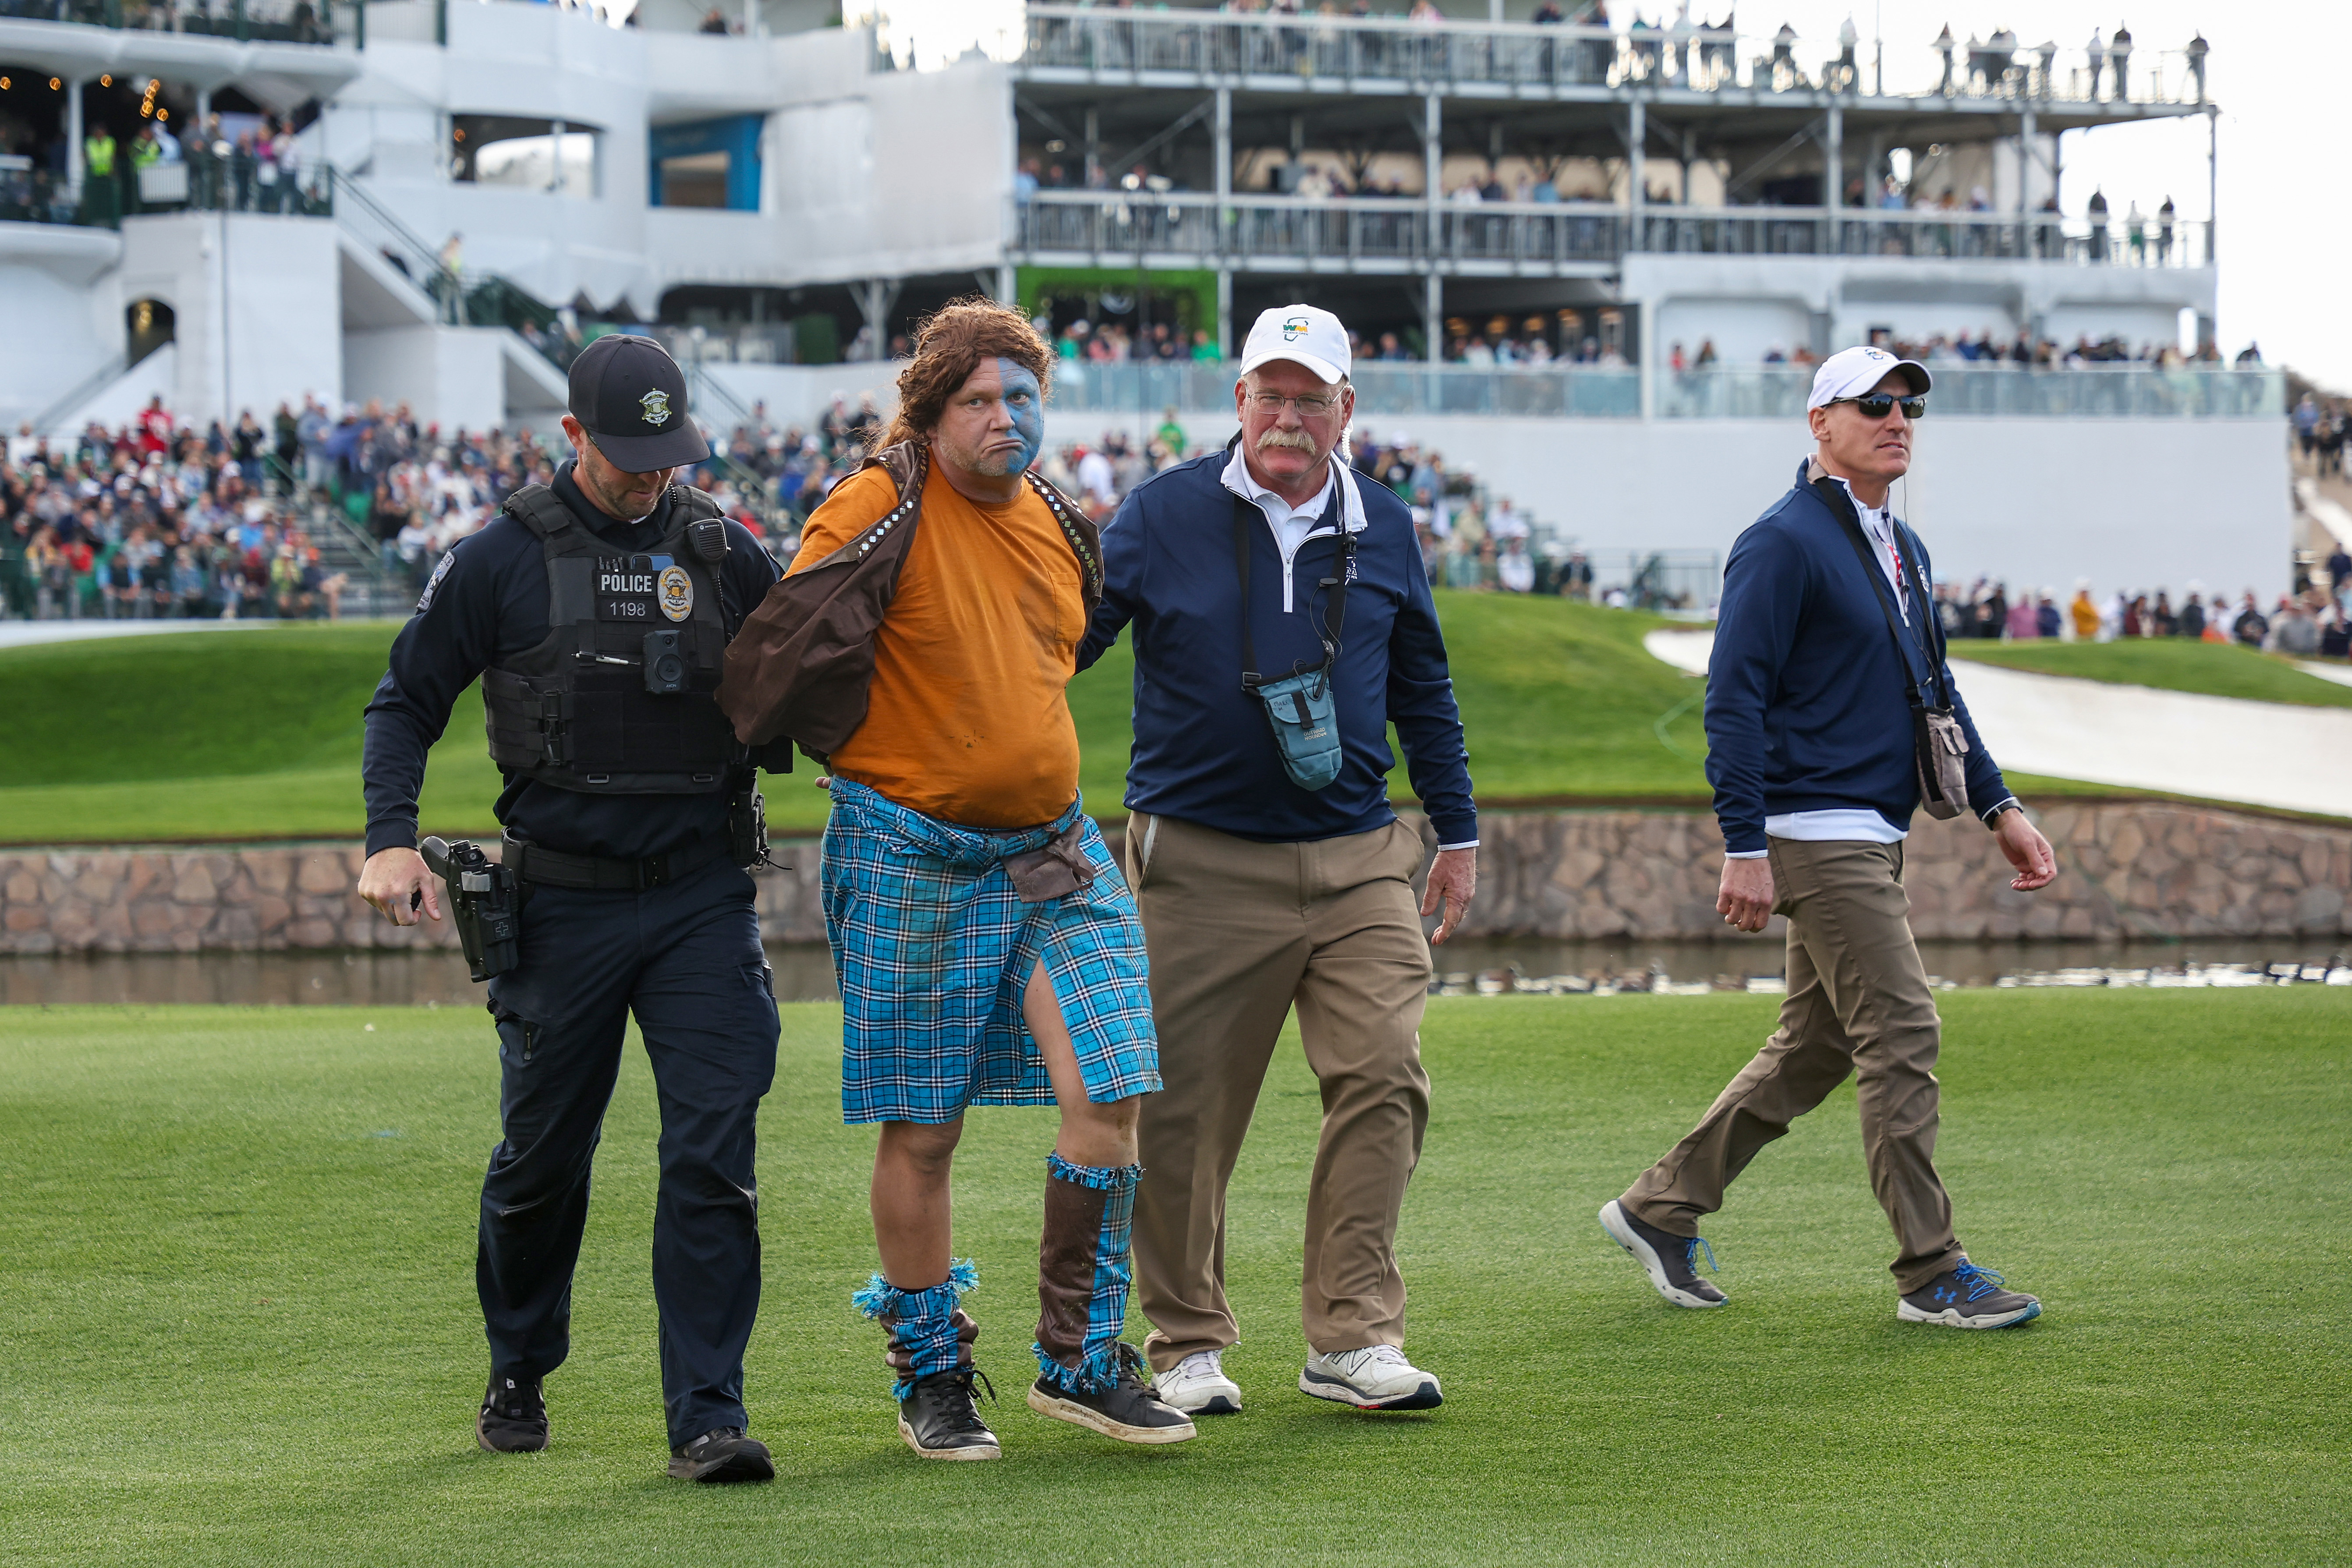 A fan dressed in costume as William Wallace from Braveheart is apprehended at the WM Phoenix Open.